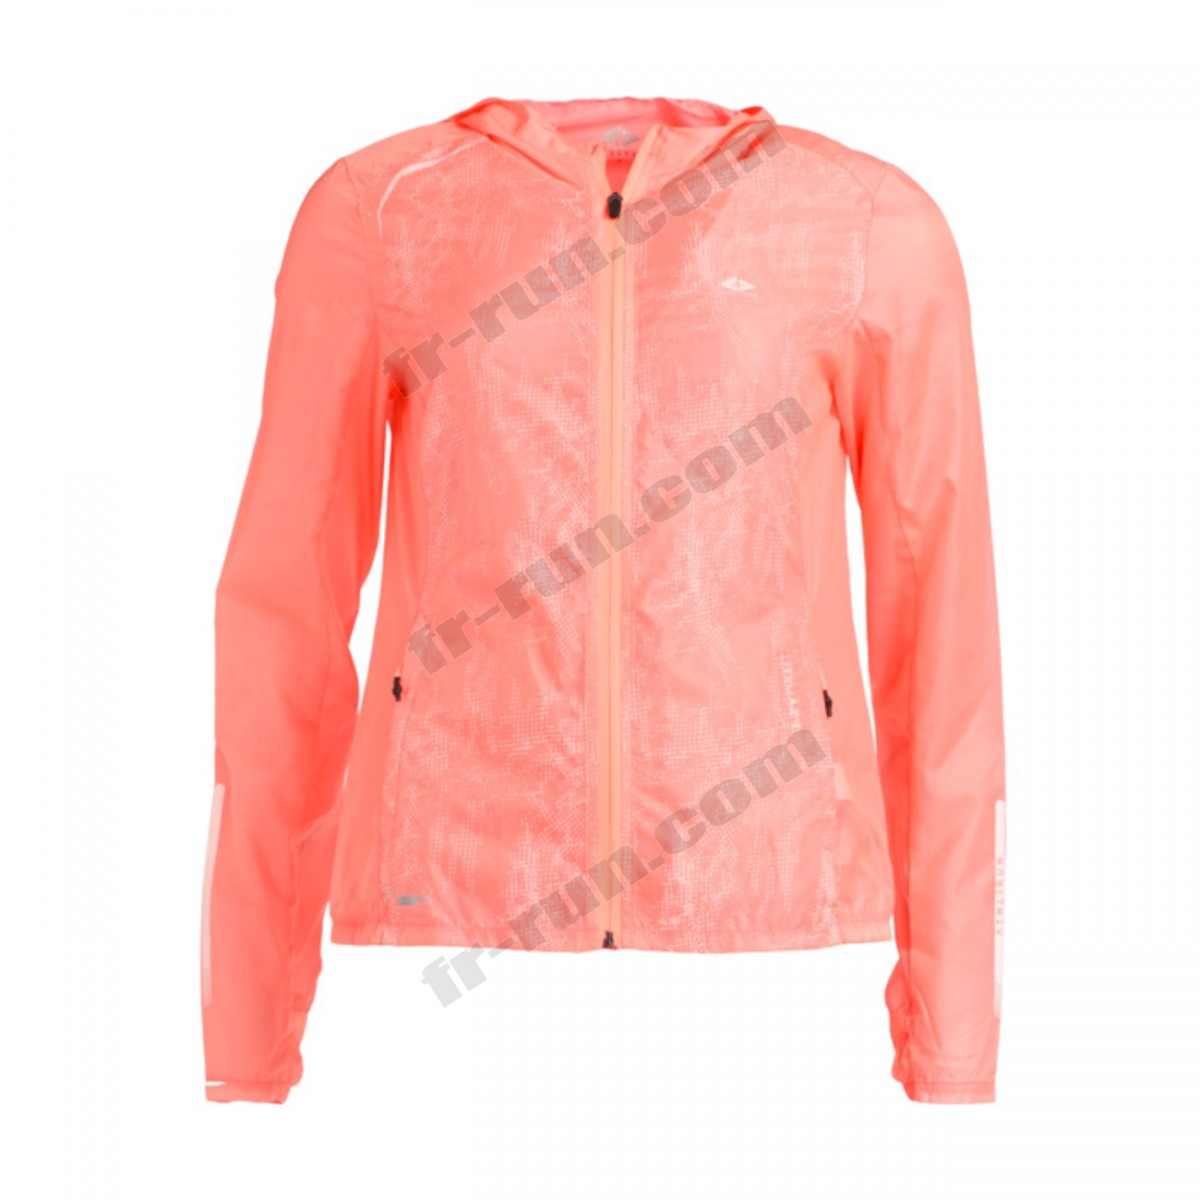 Athlitech/COUPE-VENT running femme ATHLITECH KLYNE 300 CPP REFLECT √ Nouveau style √ Soldes - -0